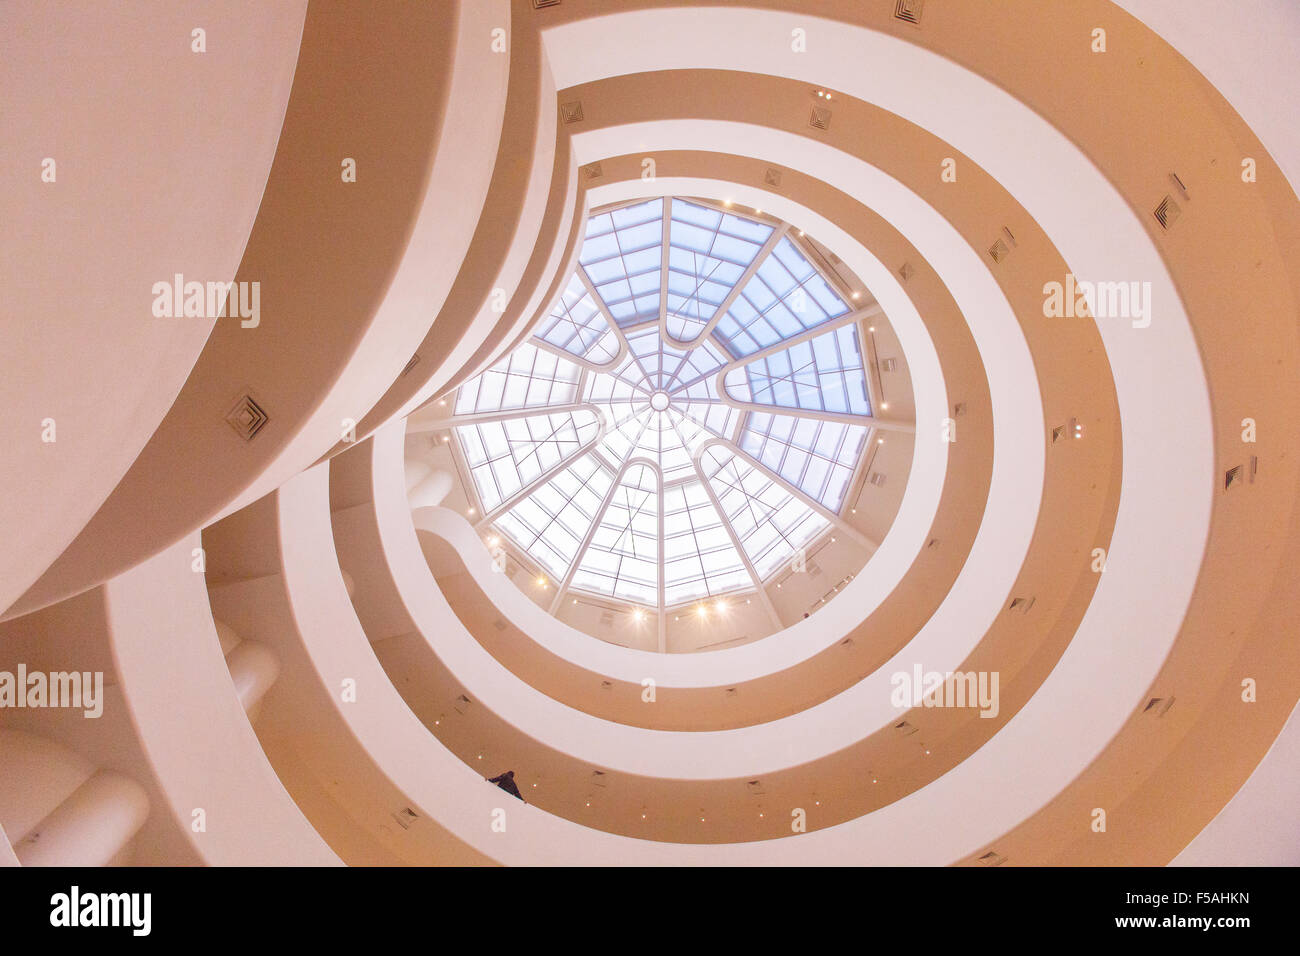 The Guggenheim Museum in New York City, United states of America. Designed by Frank lloyd Wright. Stock Photo